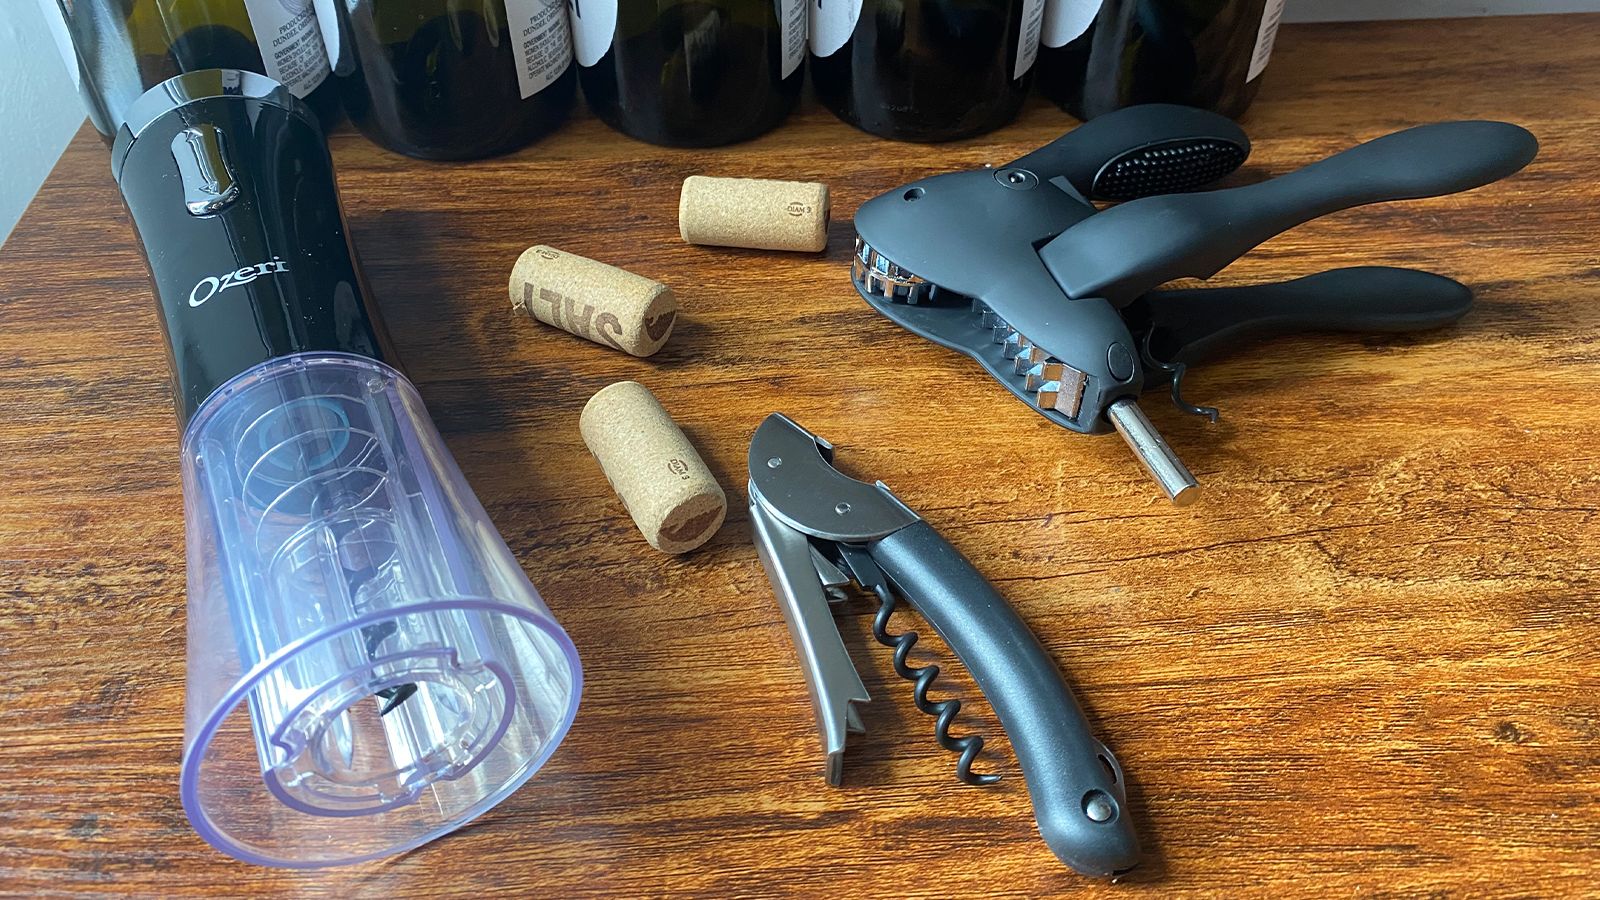 My expensive Oxo wine opener just broke at the worst possible time